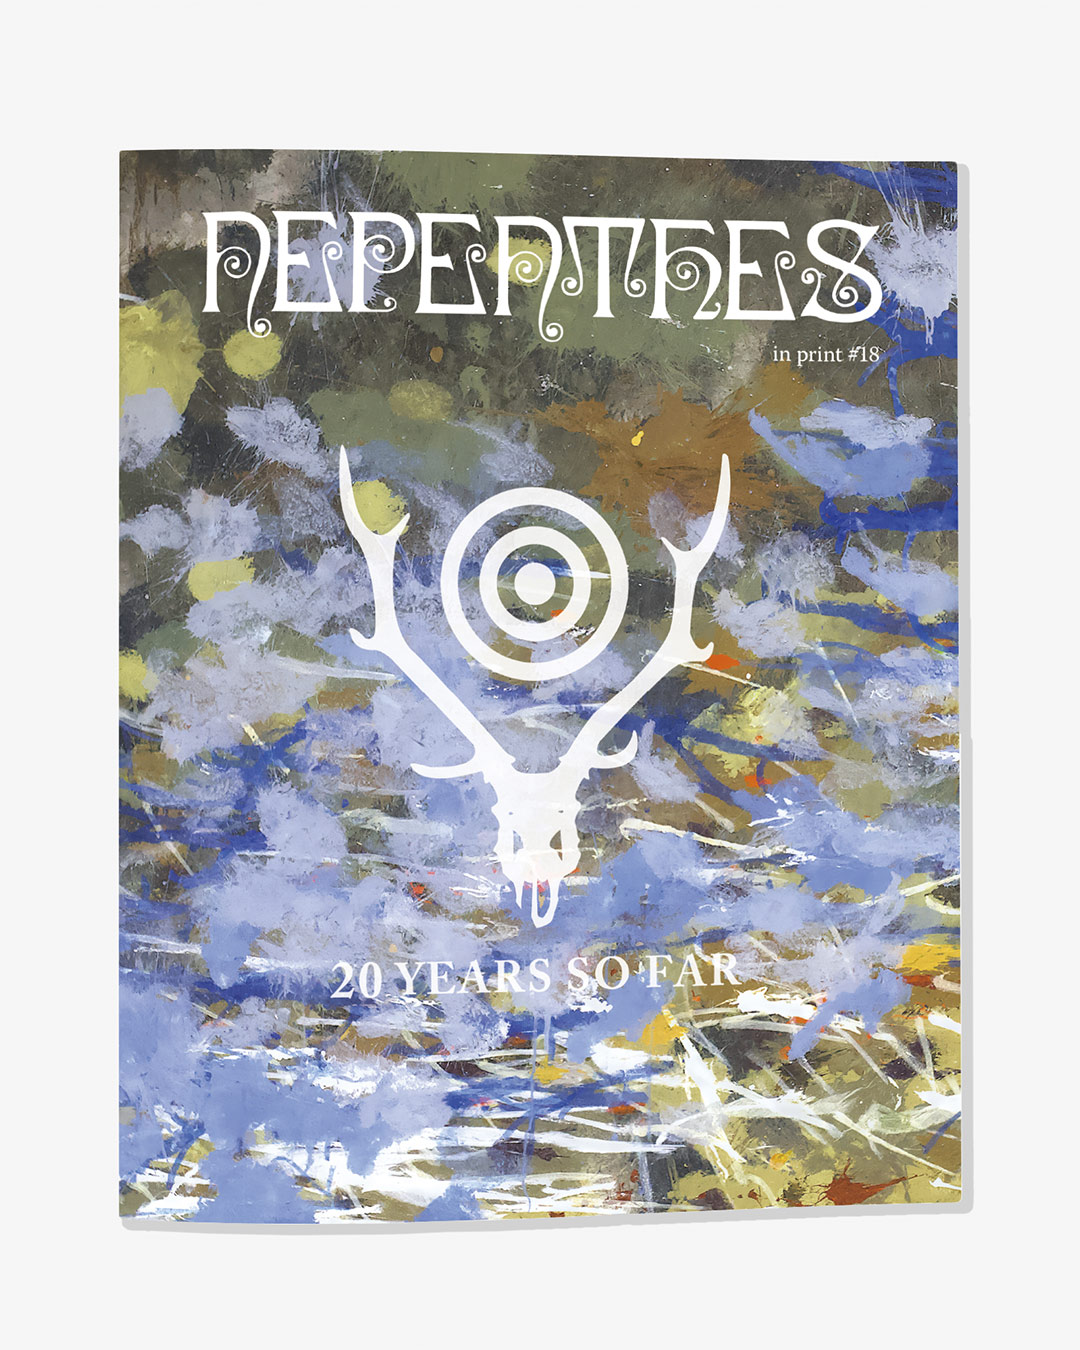 『NEPENTHES in print』 #18“SOUTH2 WEST8 20th Anniversary Issue”